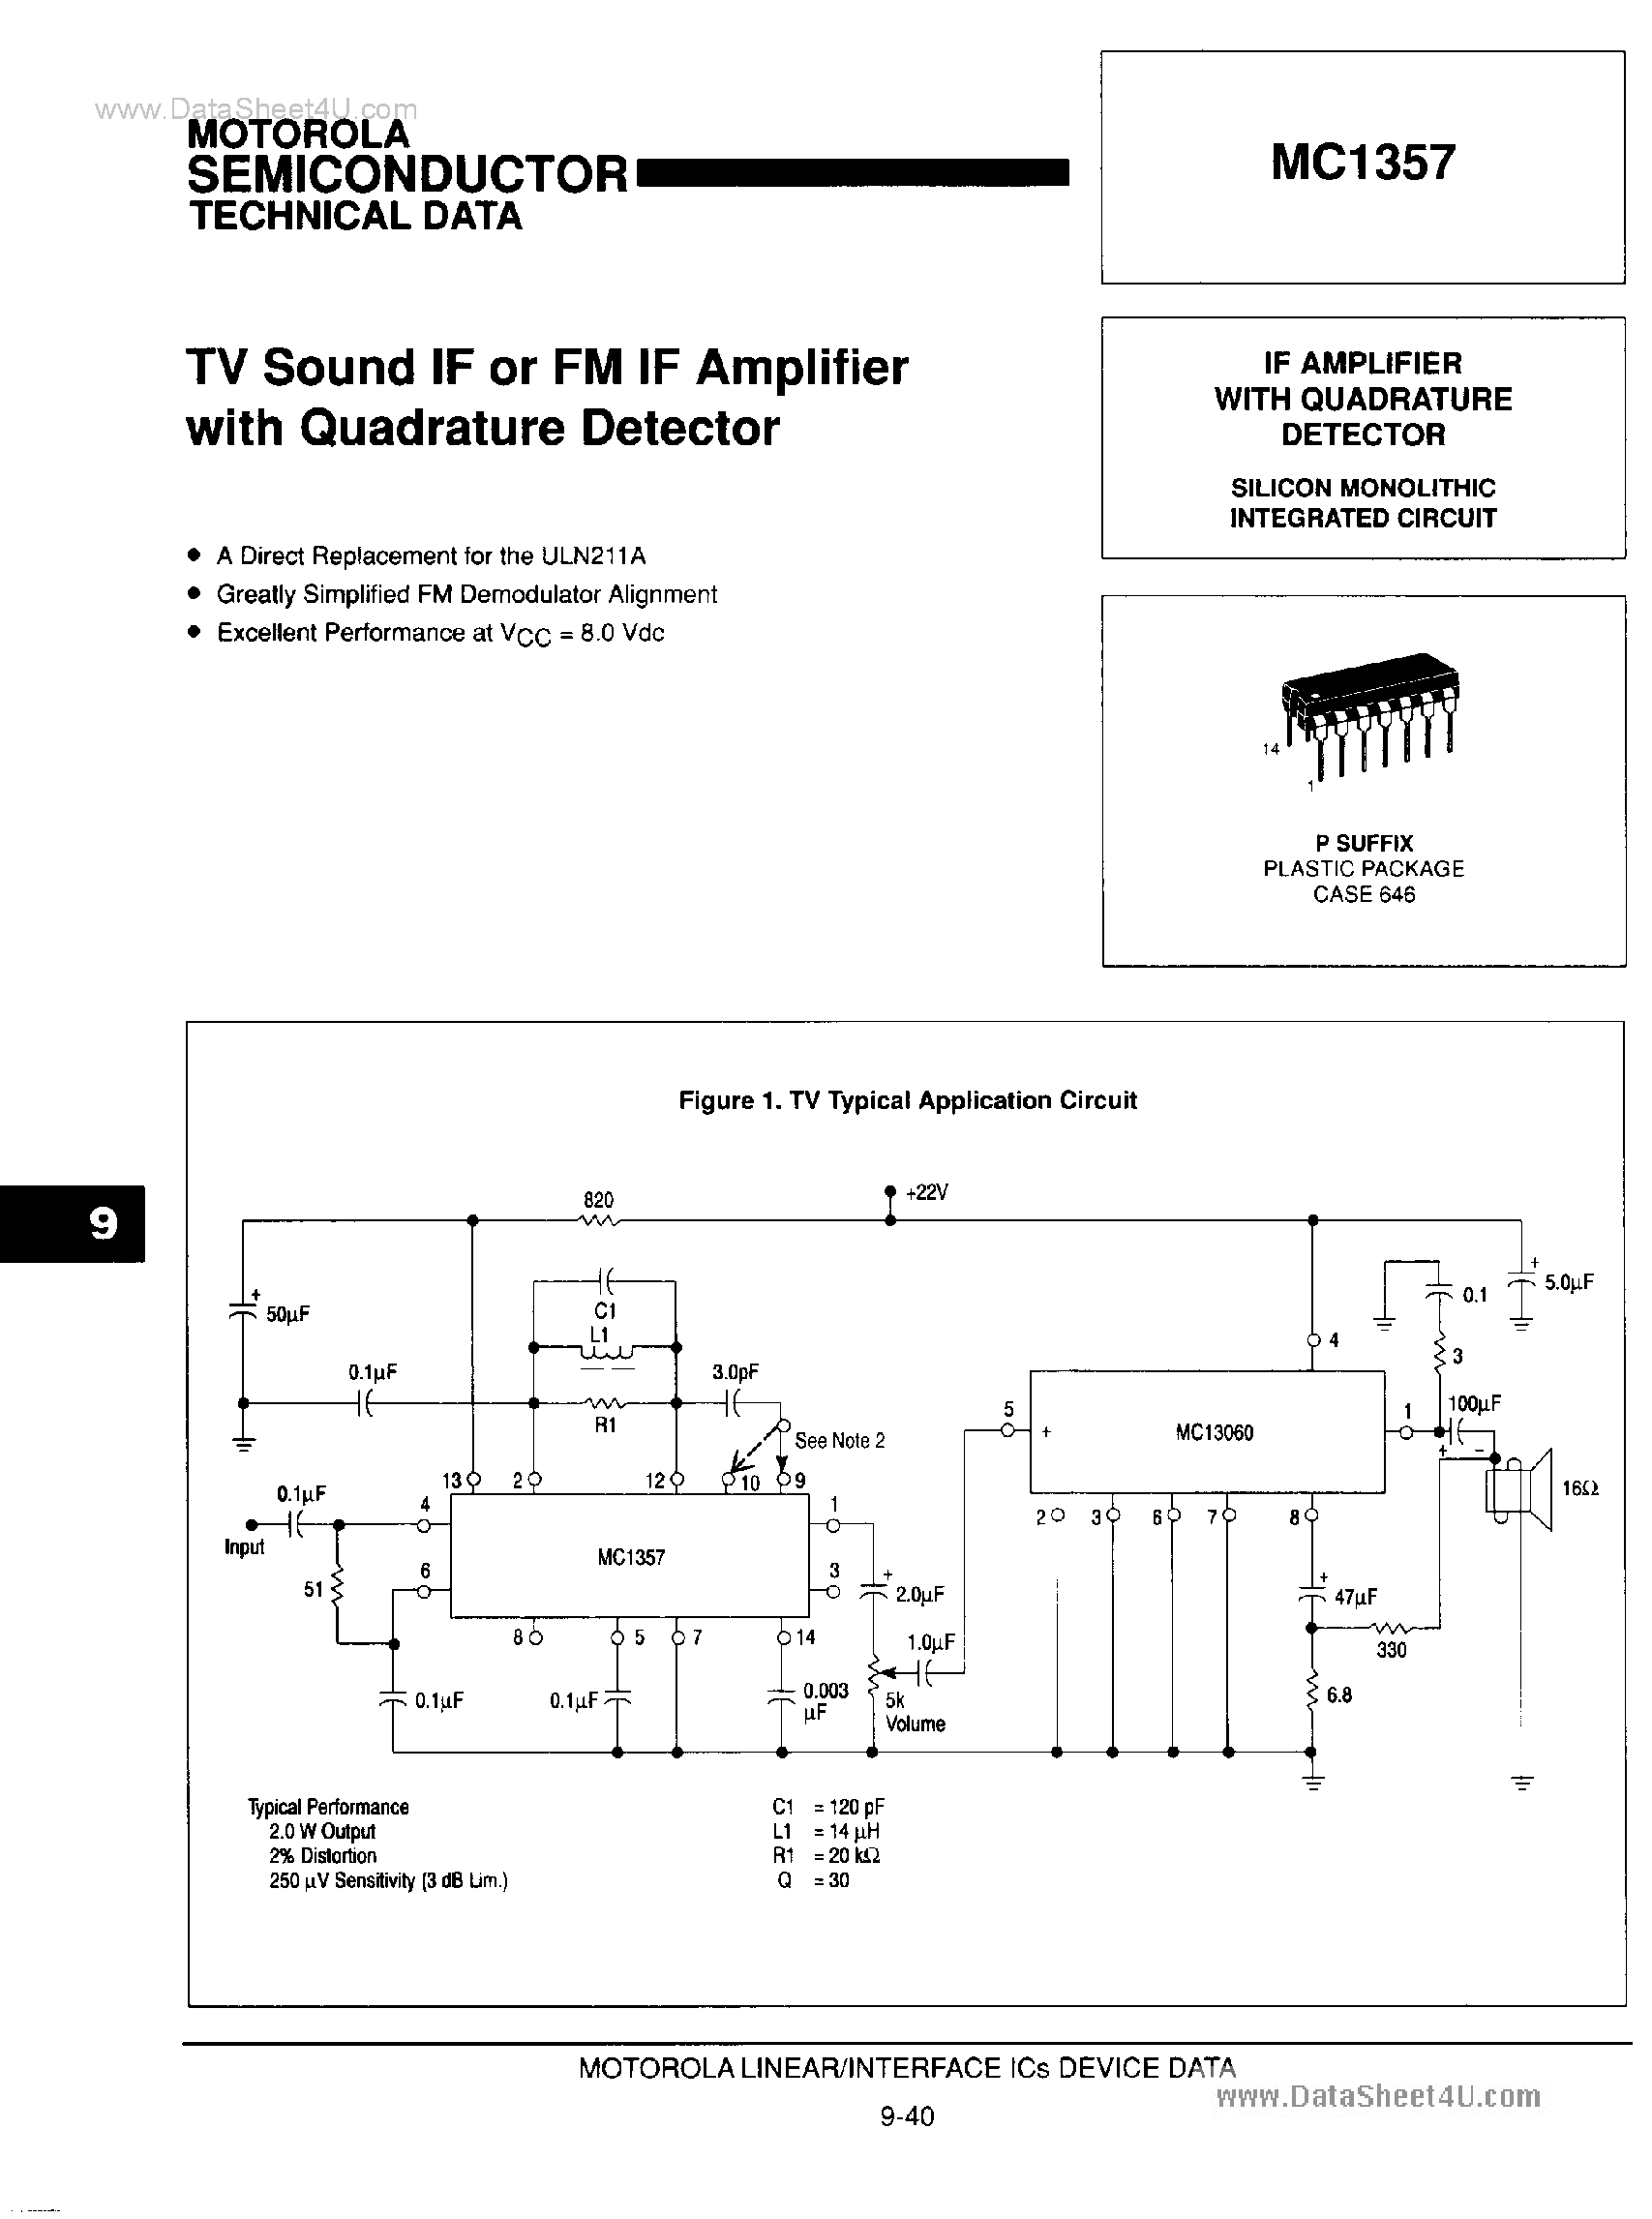 Datasheet MC1357-TV Sound IF or FM IF Amplifier page 1